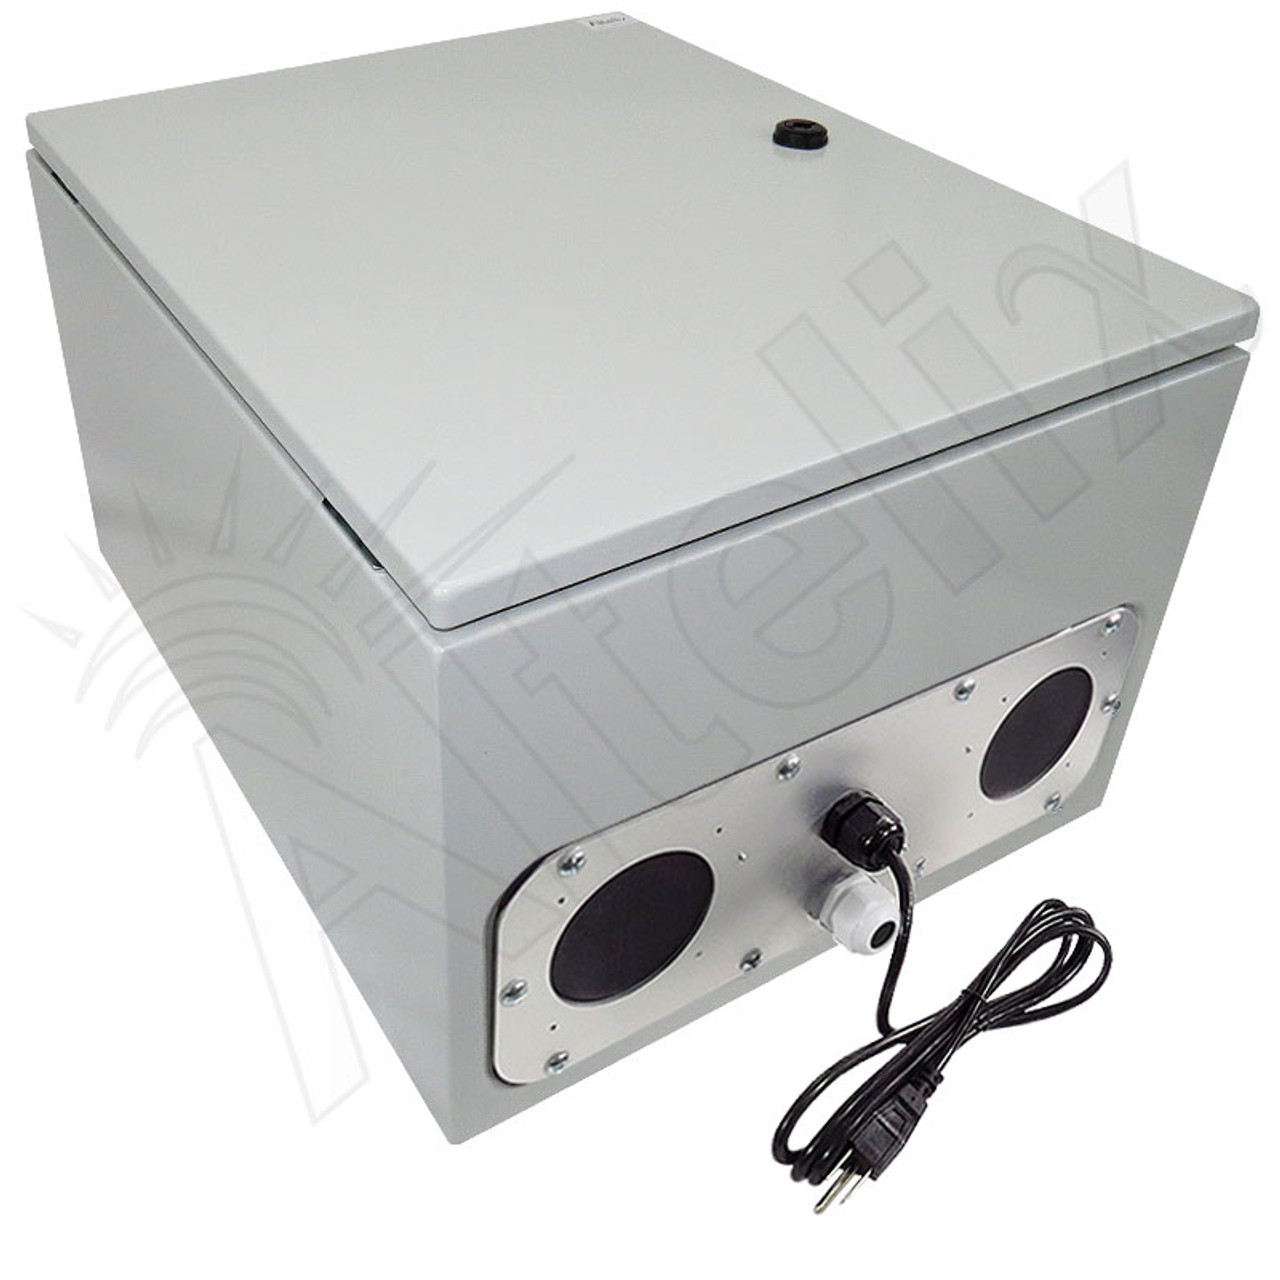 Altelix 20x16x12 Steel Heated Weatherproof NEMA Enclosure with Dual Cooling  Fans, 200W Heater, 120 VAC Outlets and Power Cord